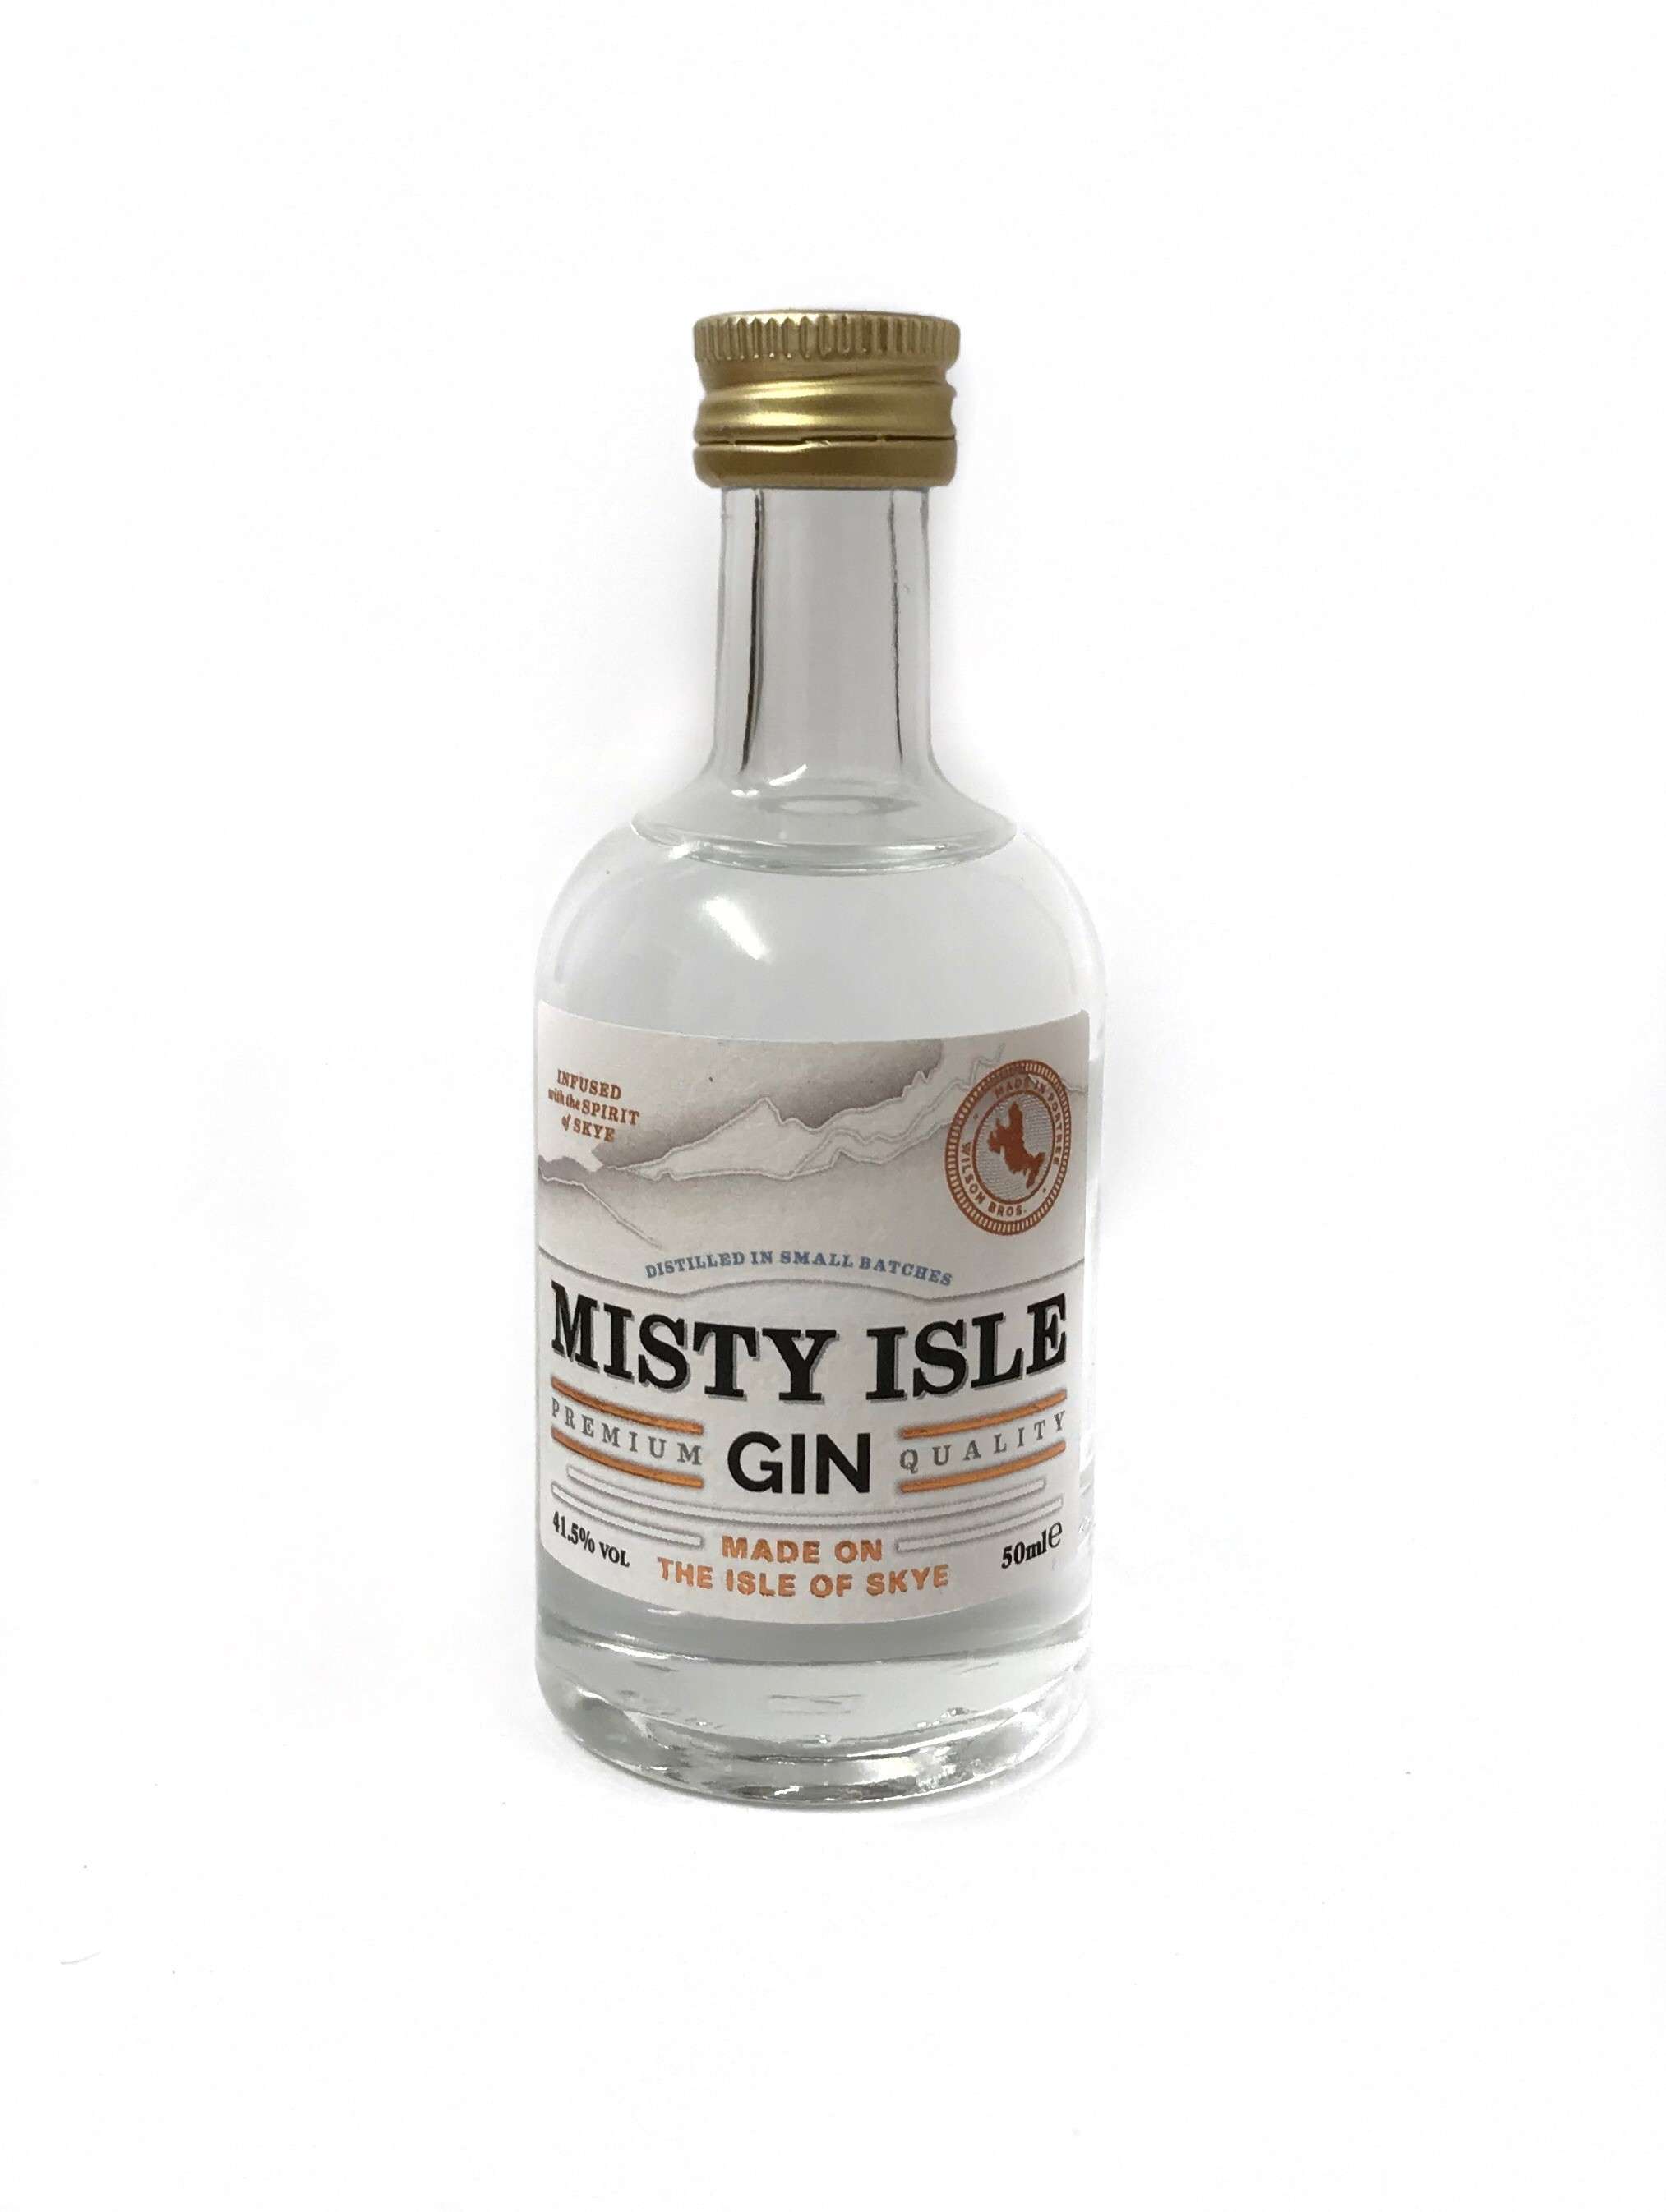 Misty Isles Gin Gins & Gin Liqueurs